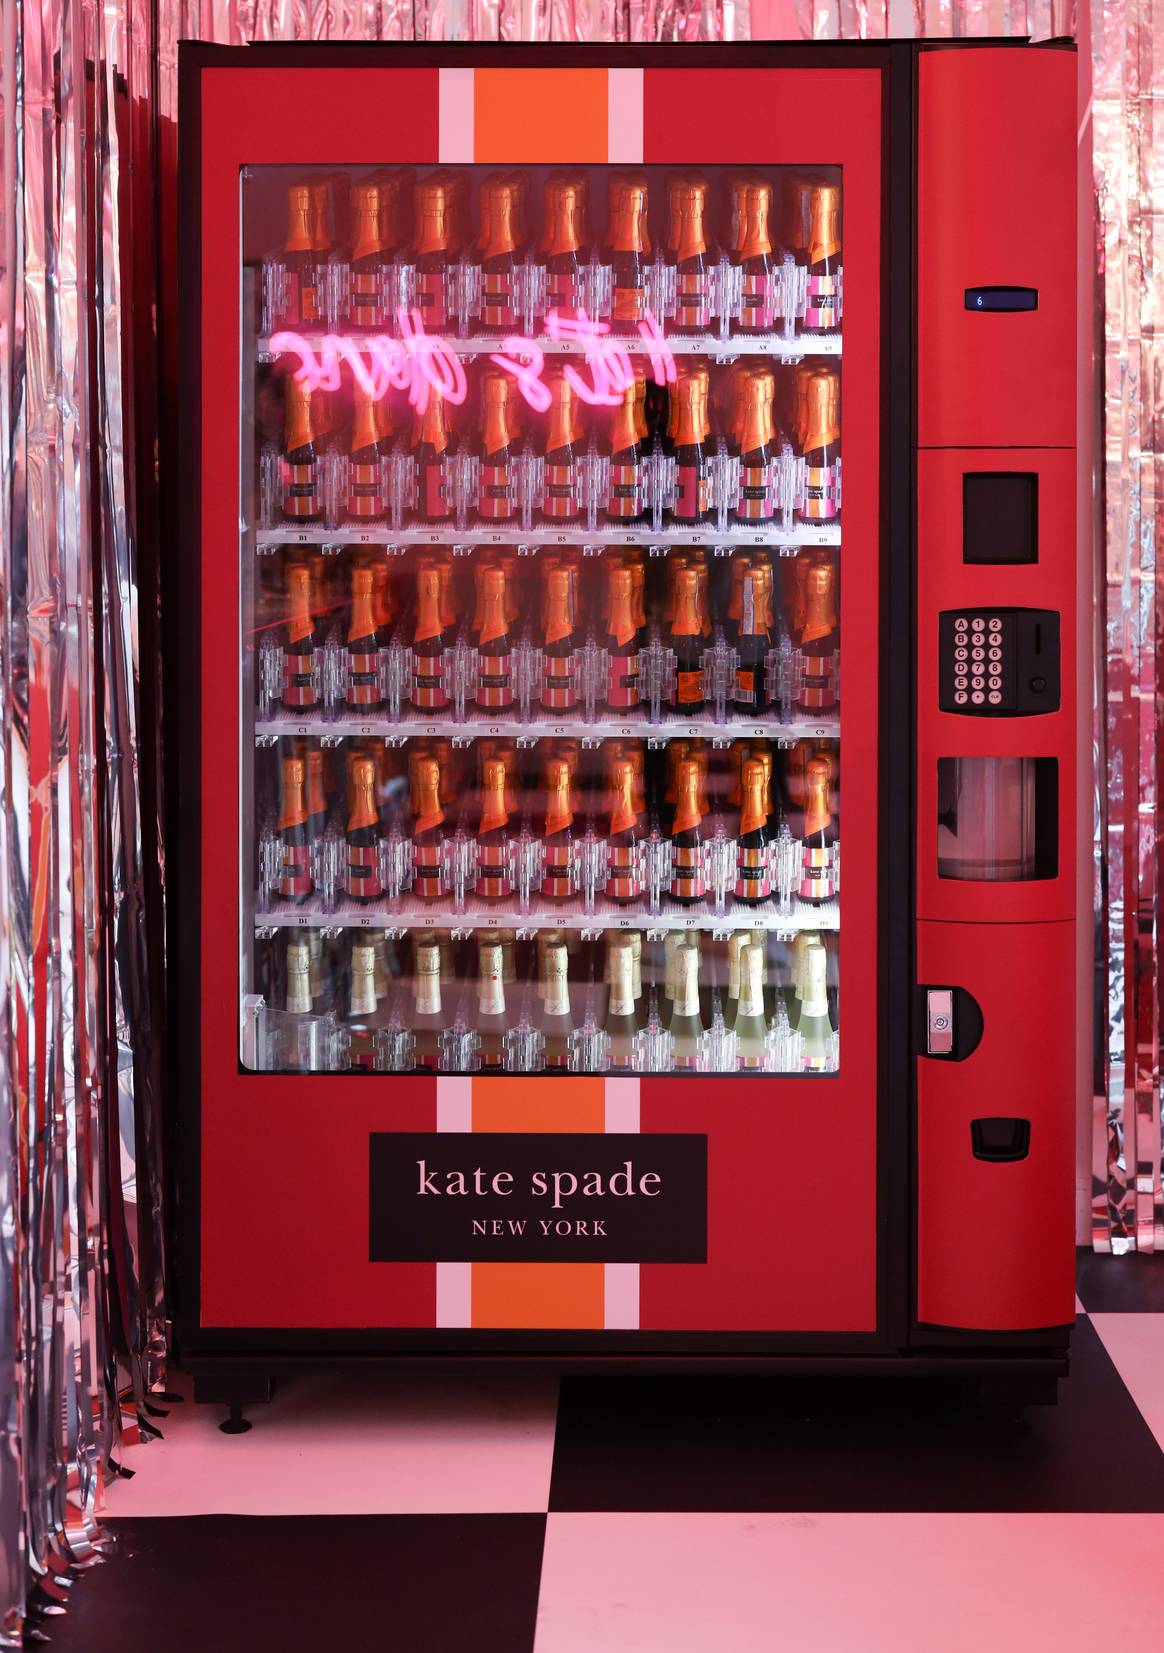 Image: Kate Spade New York by Nico Froehlich